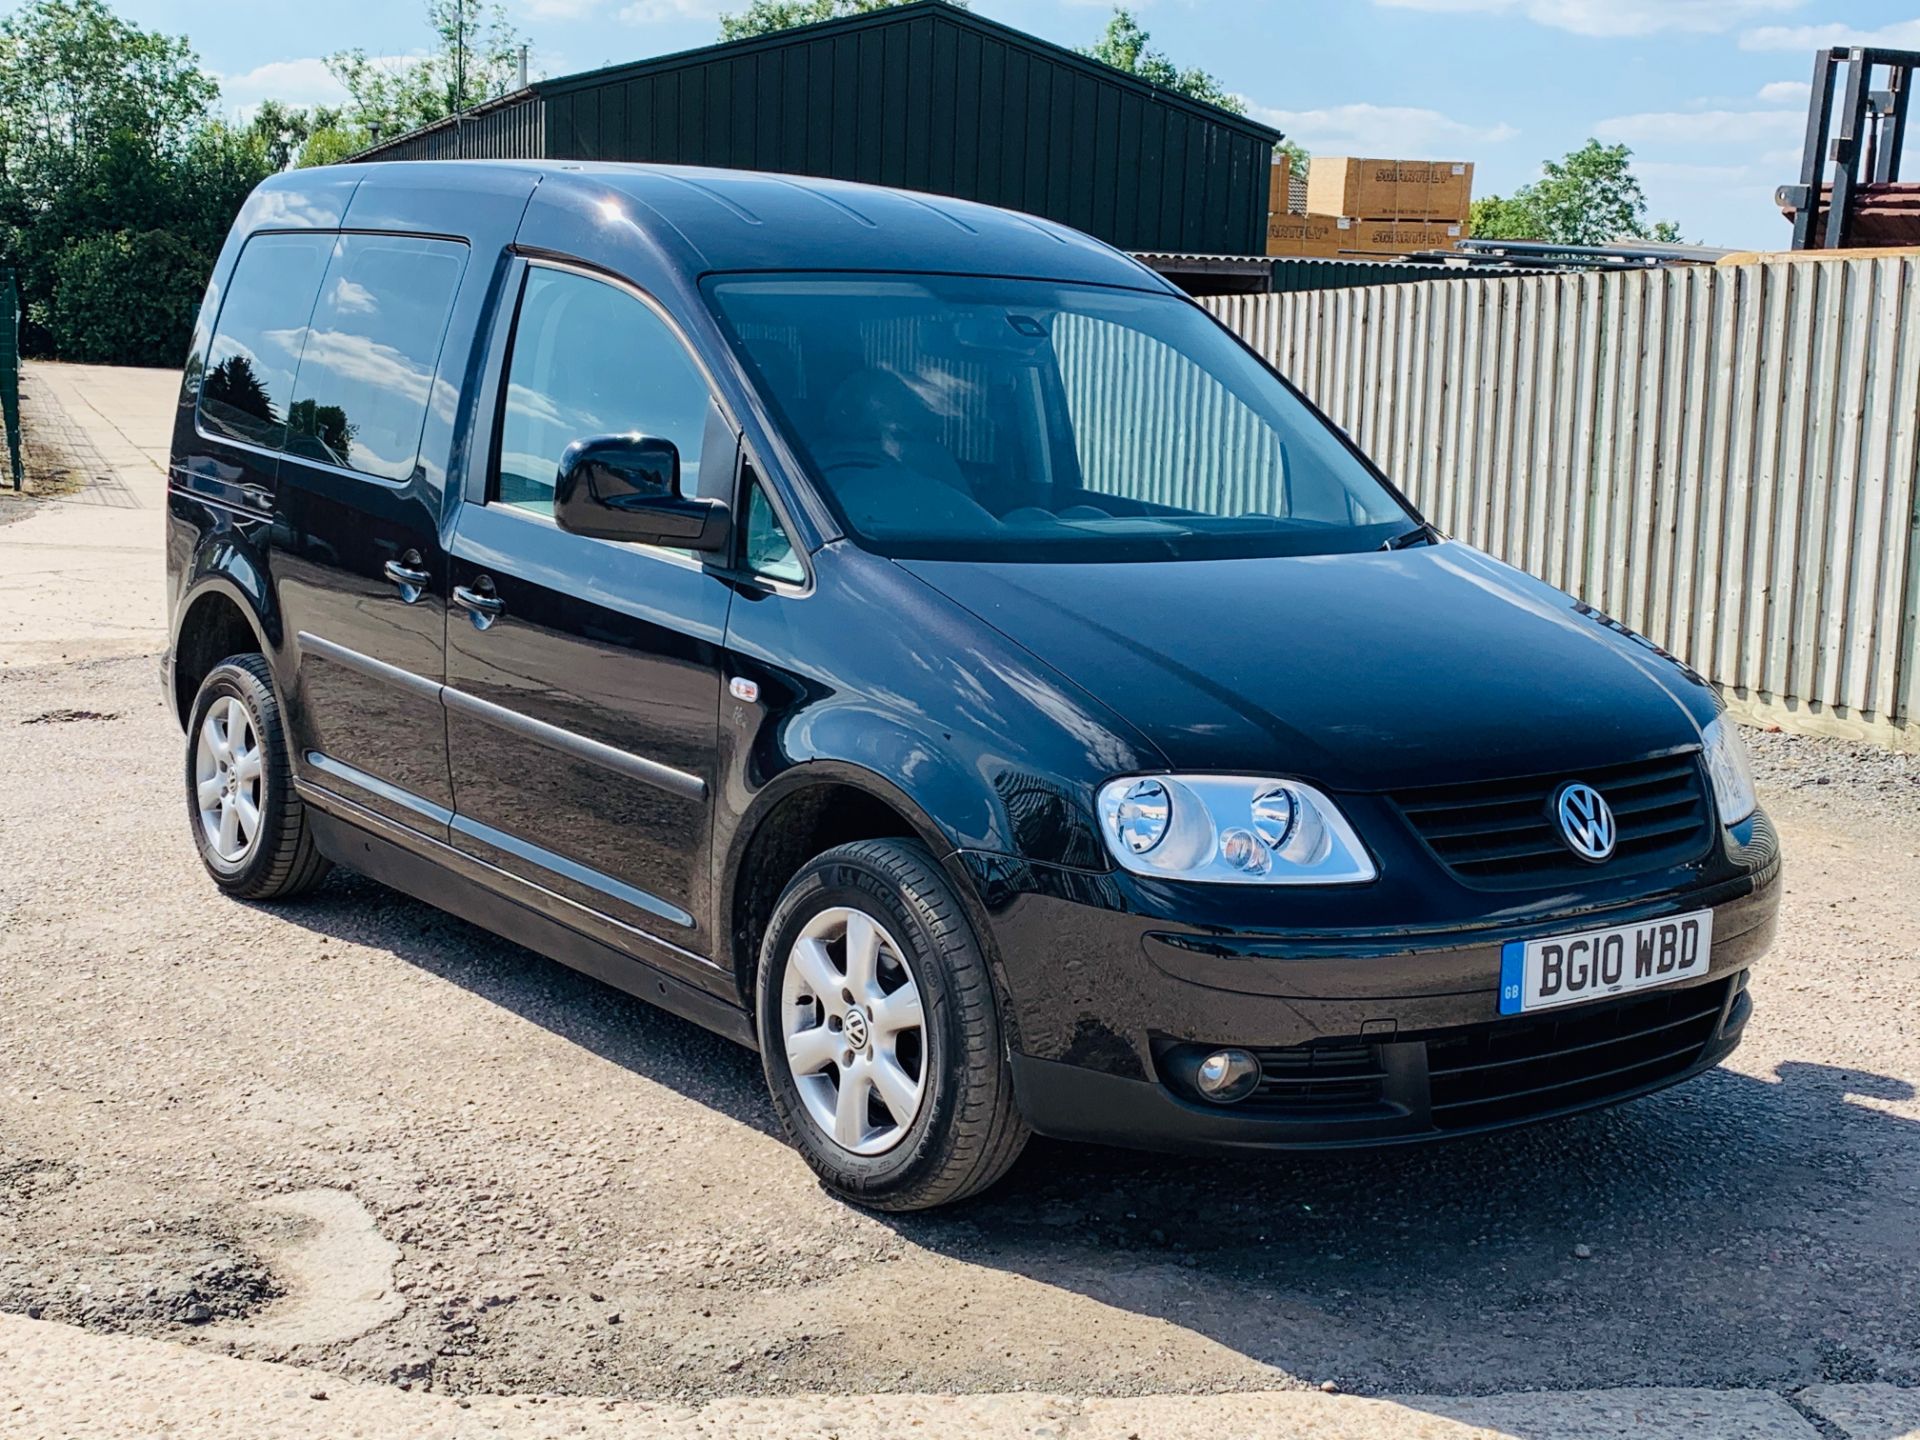 (ON SALE) VW CADDY 1.9TDI "LIFE" DSG AUTO-WHEELCHAIR ACCESSIBLE VEHICLE - ONLY 42K MILES!! - NO VAT! - Image 6 of 15